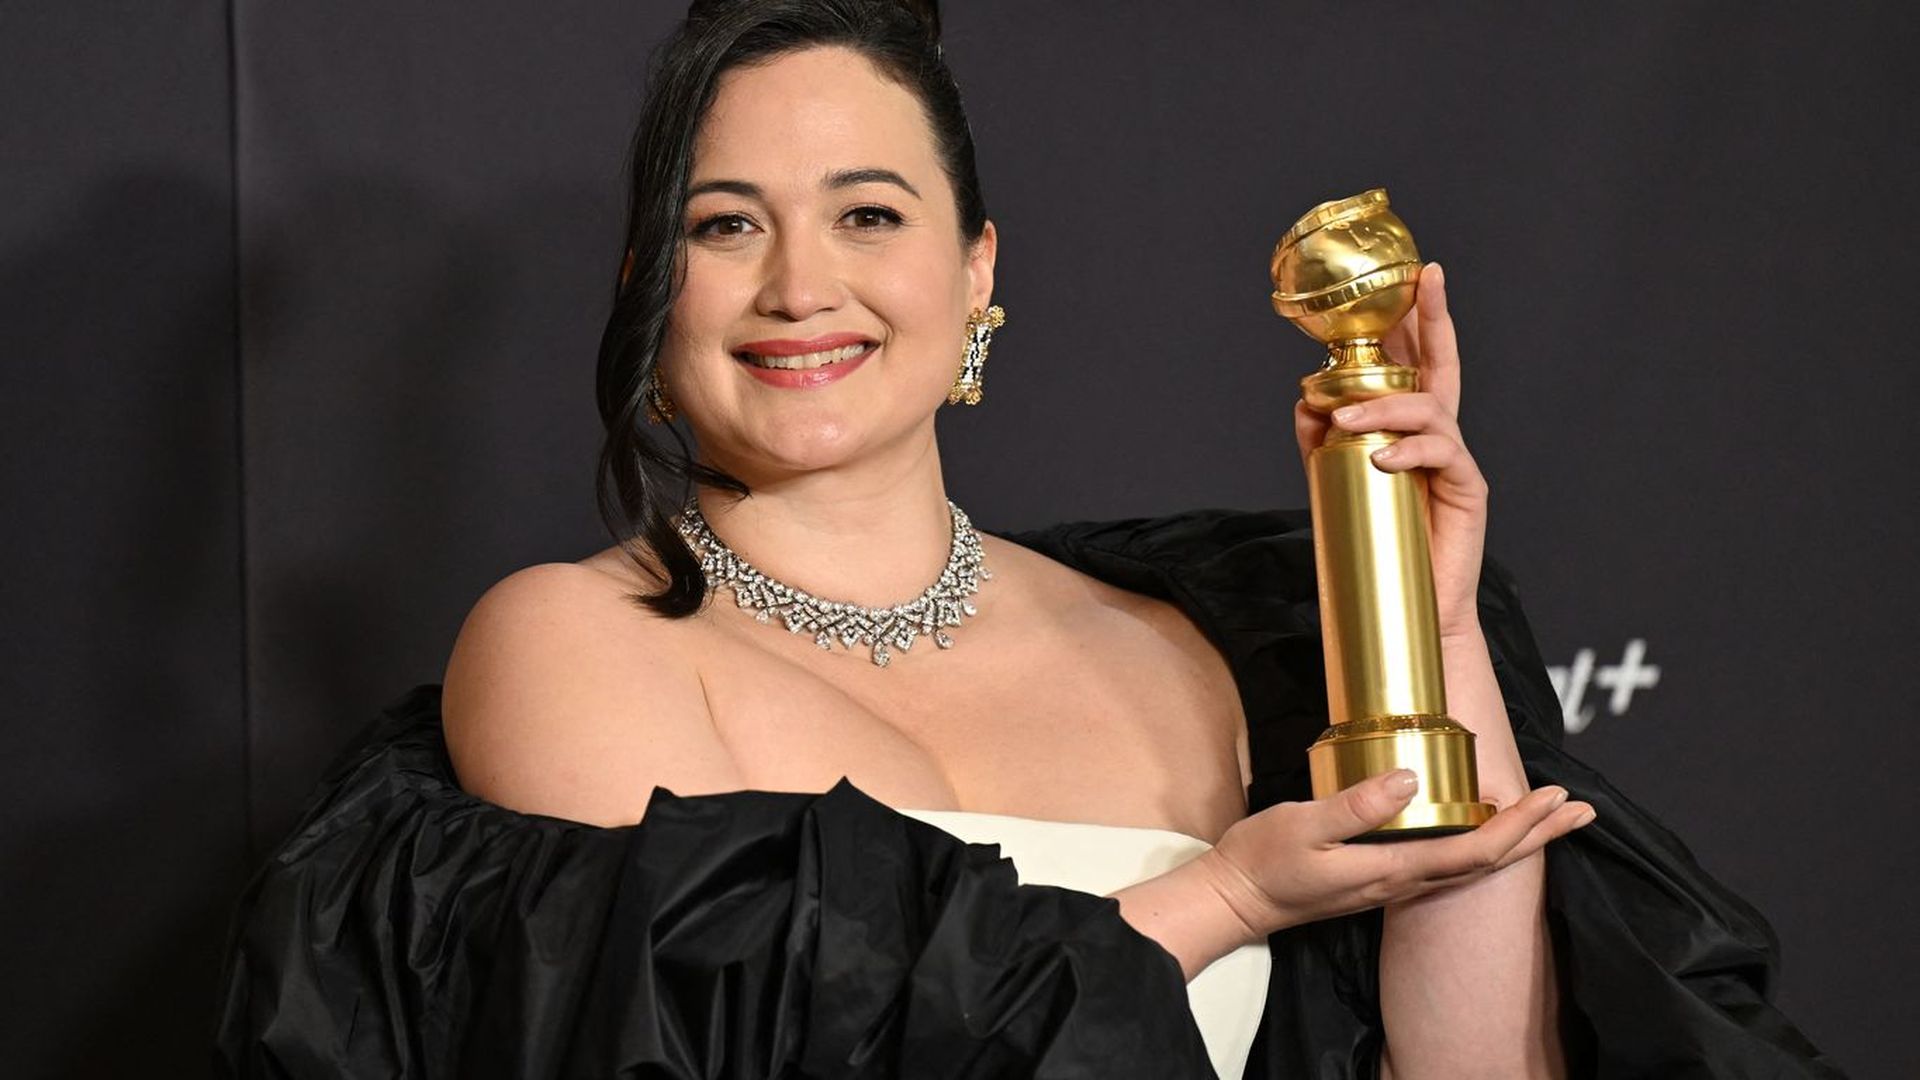 photo of a woman holding up a Golden Globe